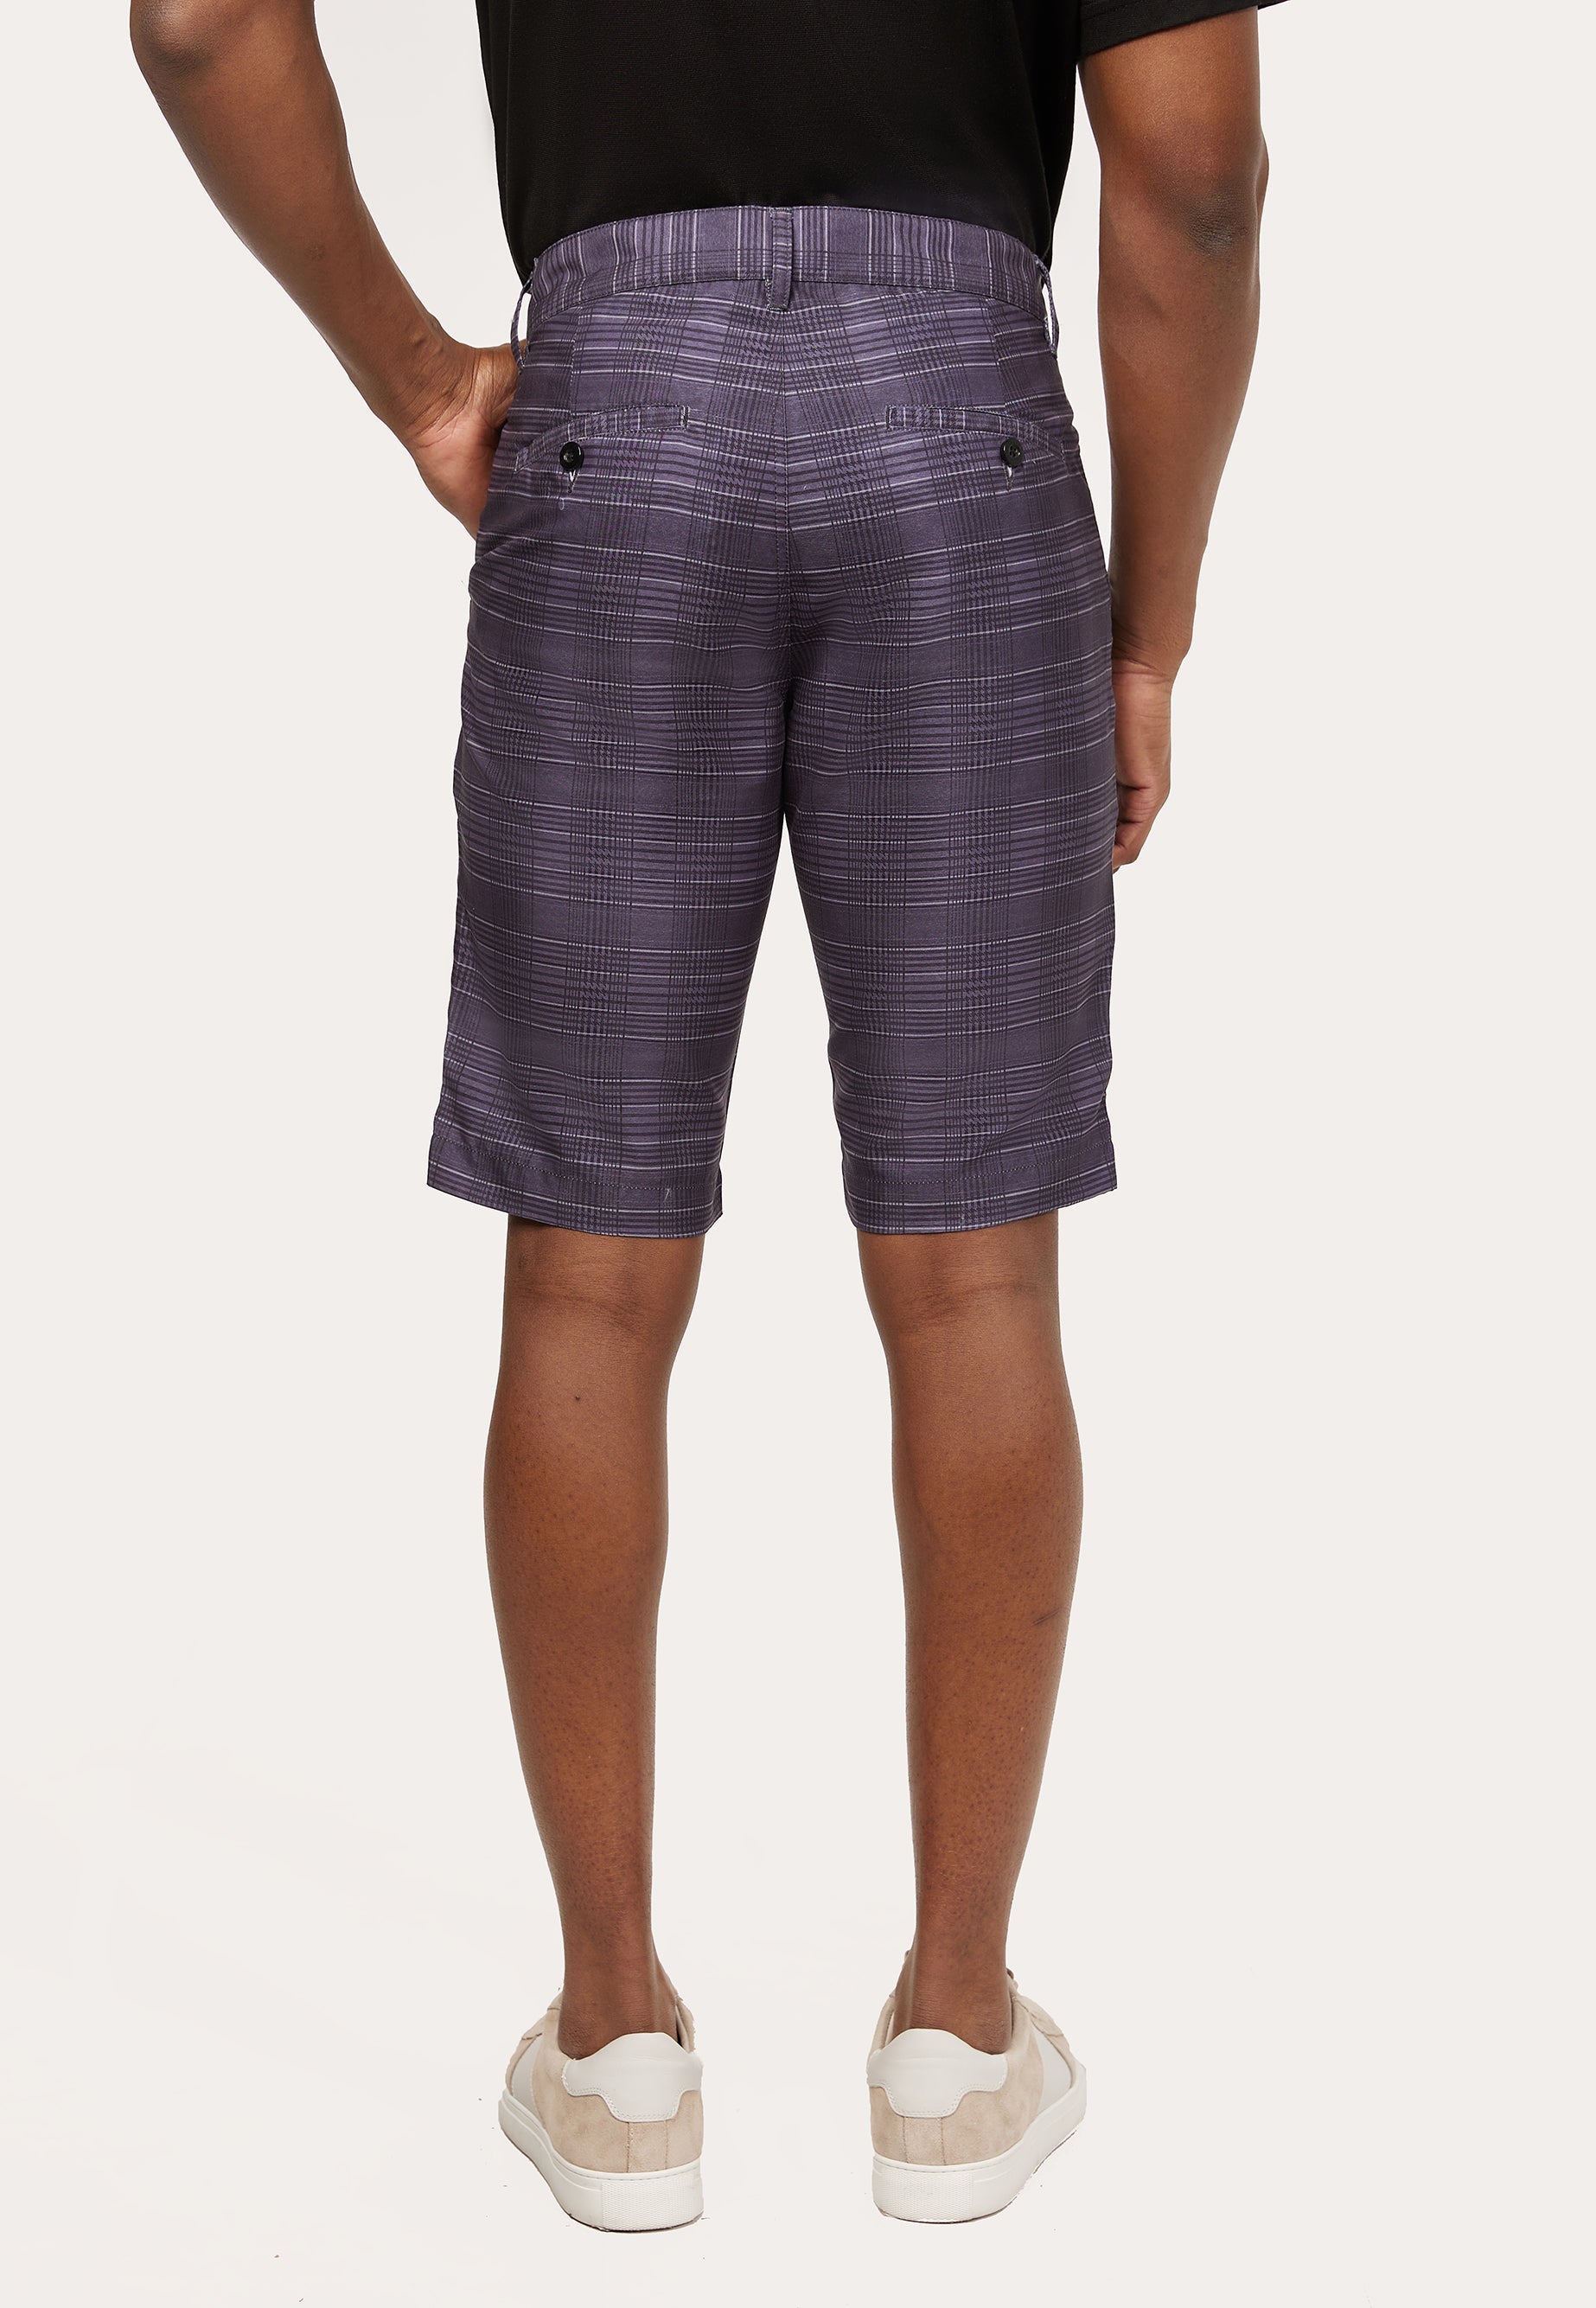 Charcoal Microfiber Bermuda Shorts with Prince of Wales Print